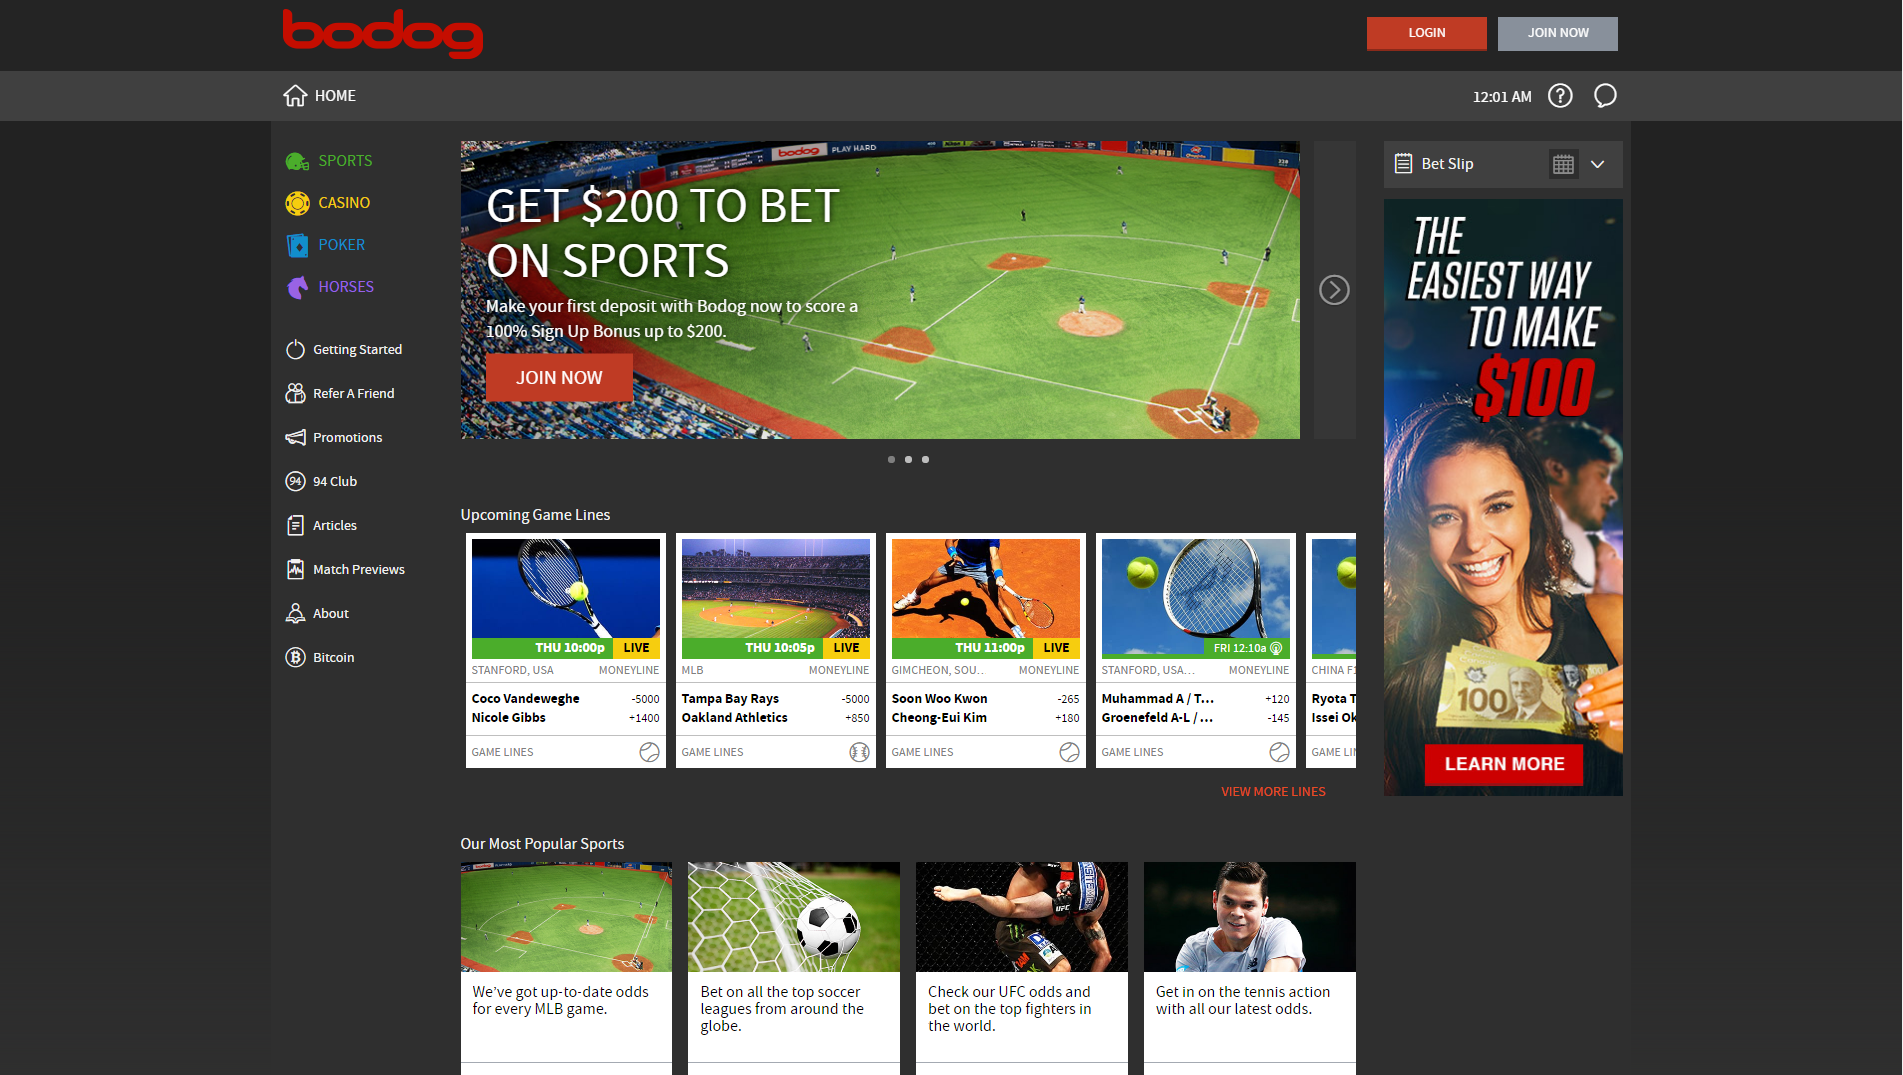 Bodog's front page; slick, simple and easy to use